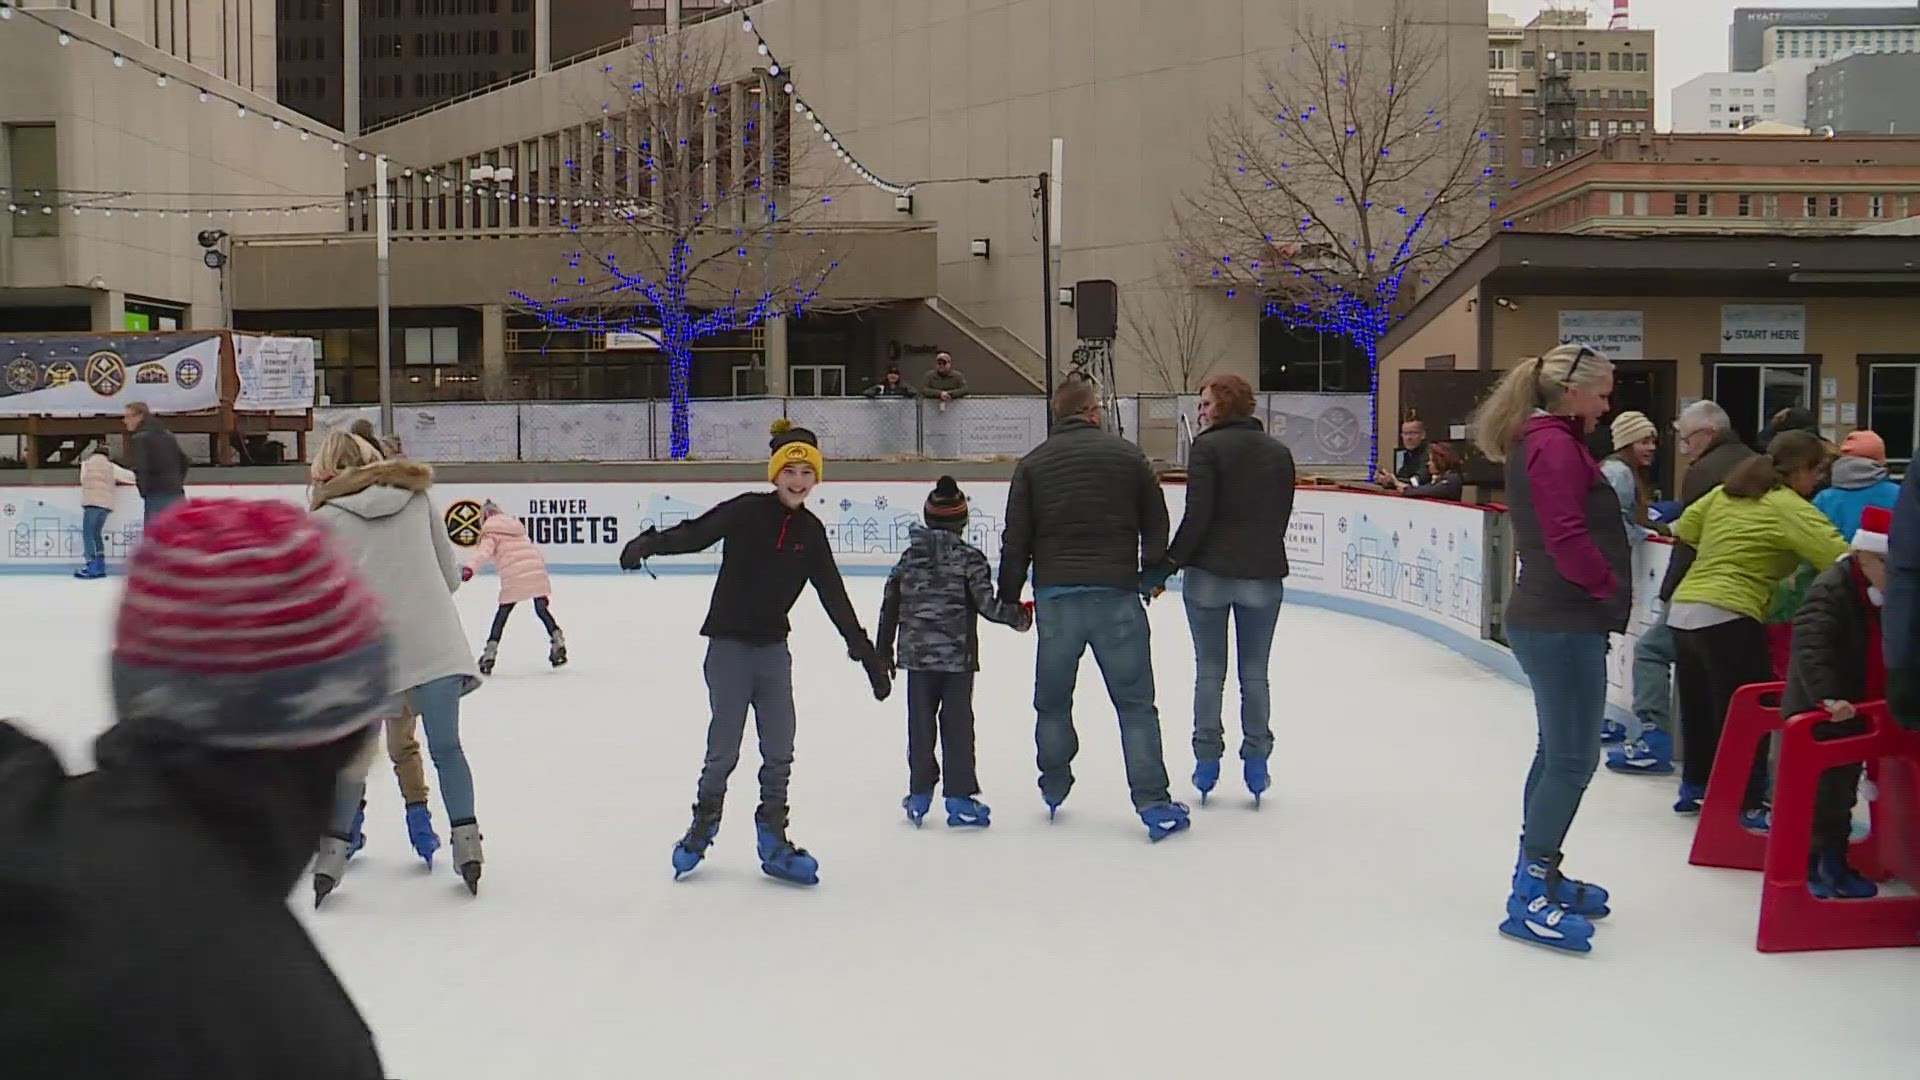 The Downtown Denver Rink will provide free skating in Skyline Park at 16th and Arapahoe streets from Monday, Nov. 20 through Sunday, Feb. 11.